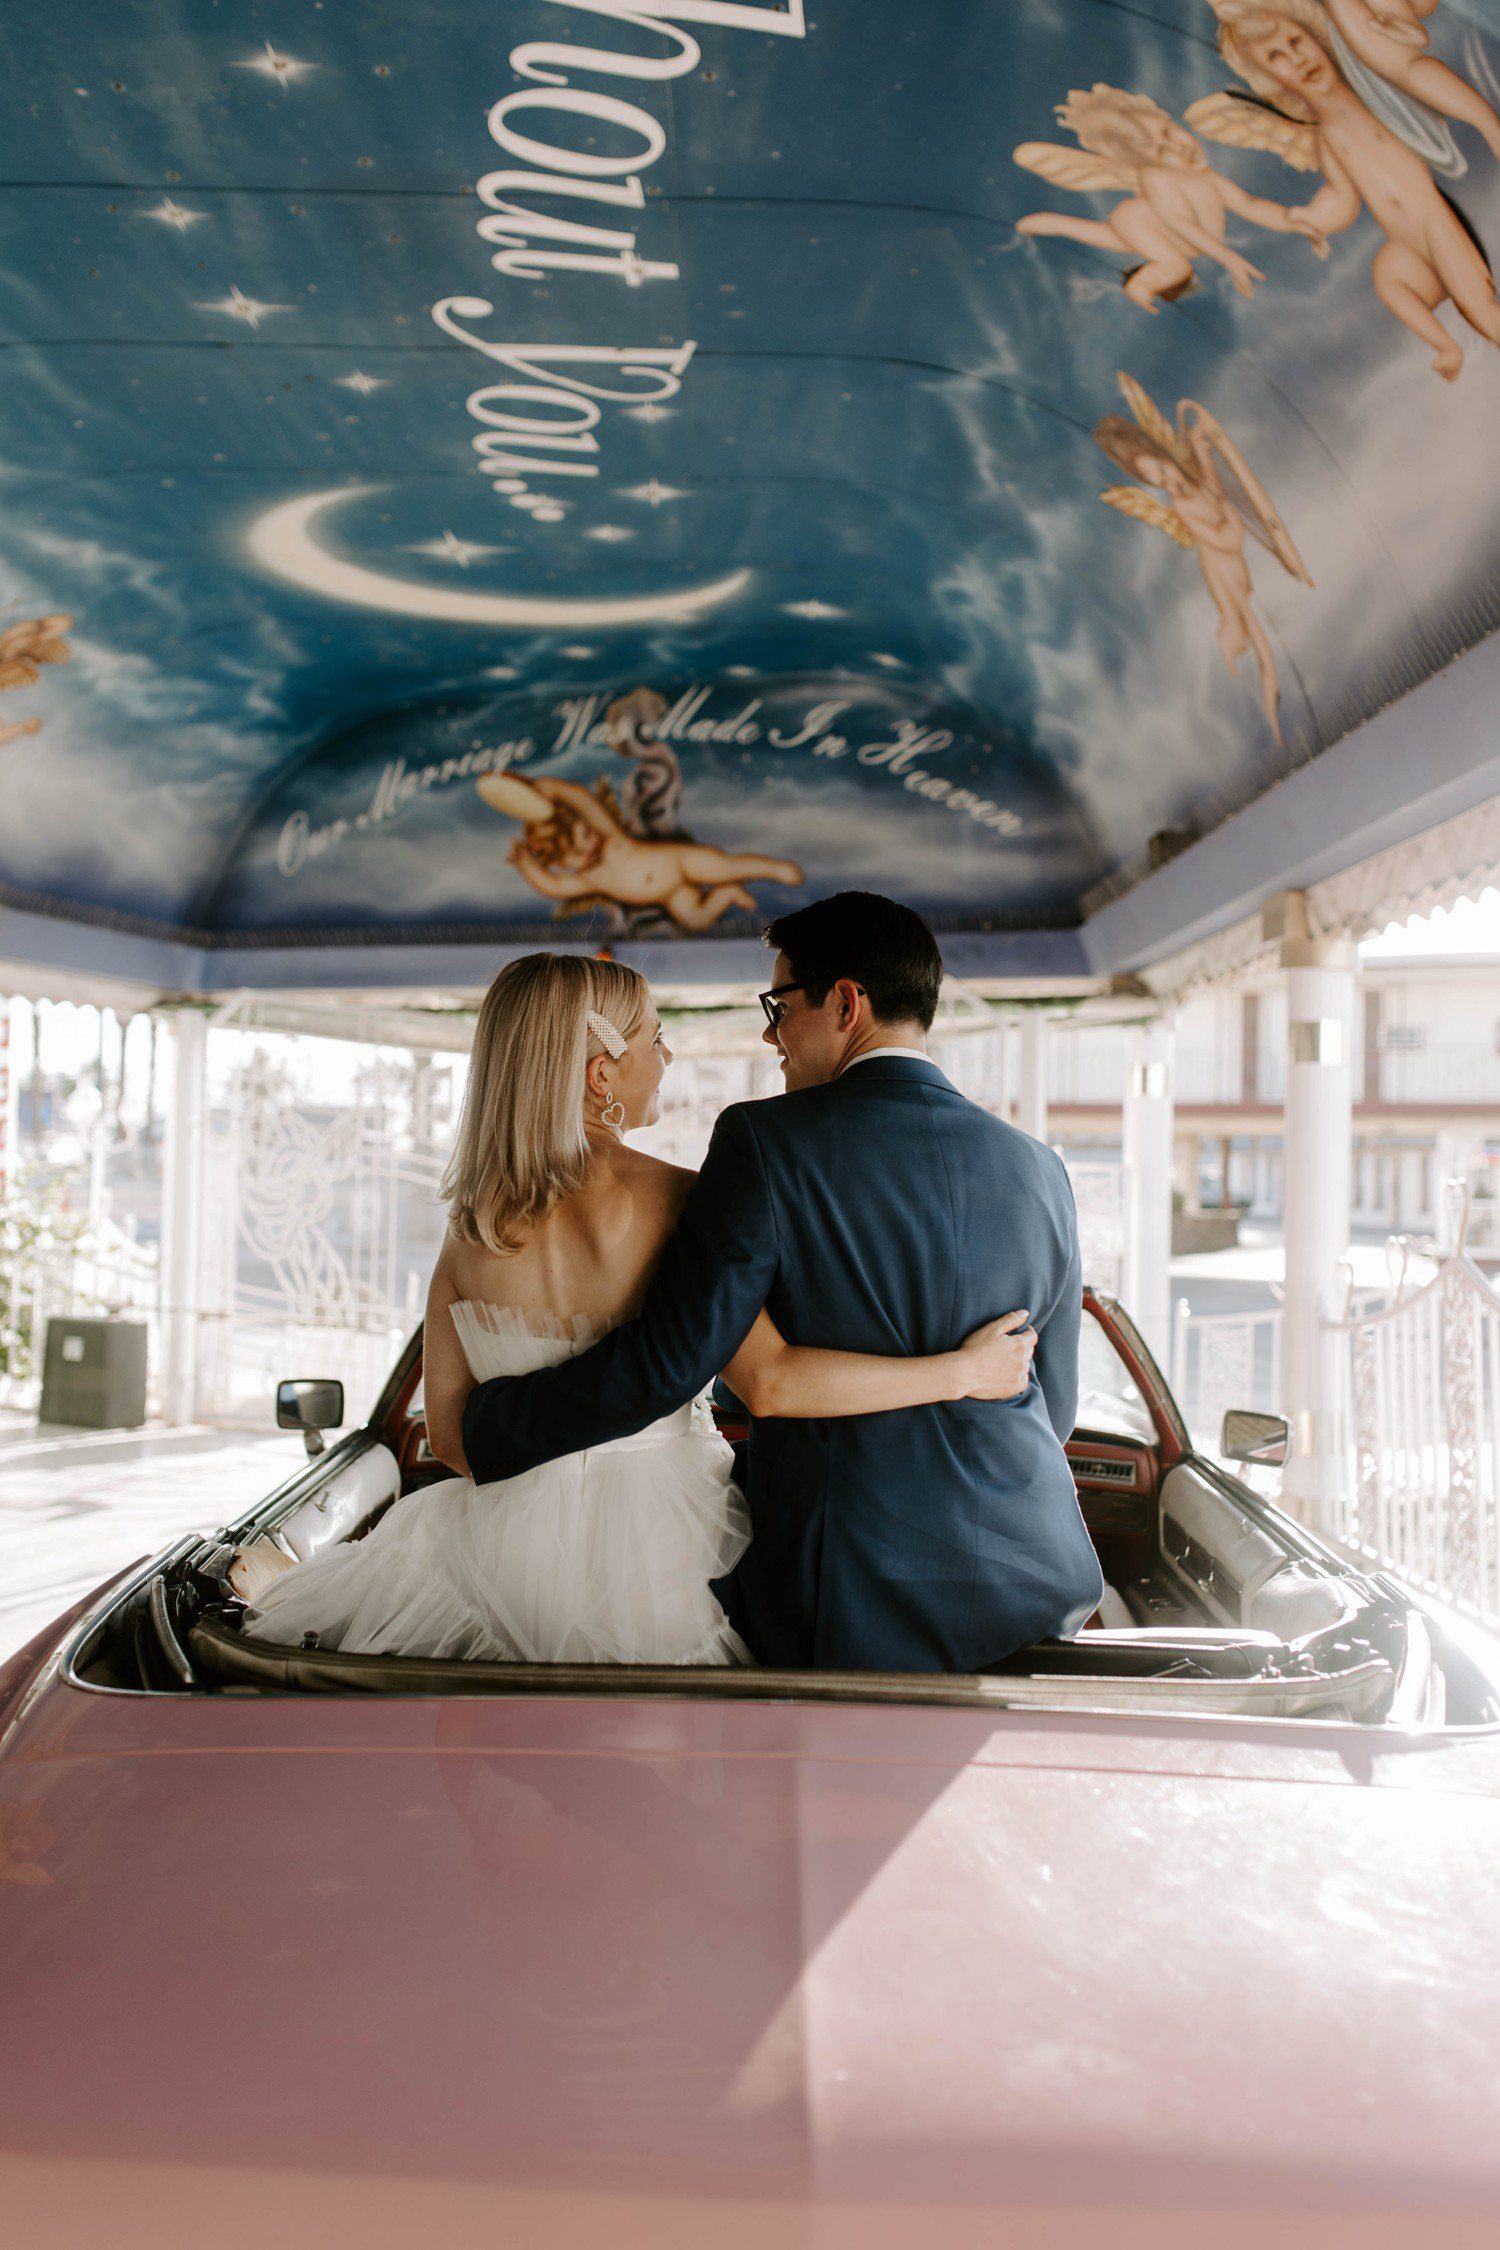 Photos with Pink Cadillac A Little White Wedding Chapel